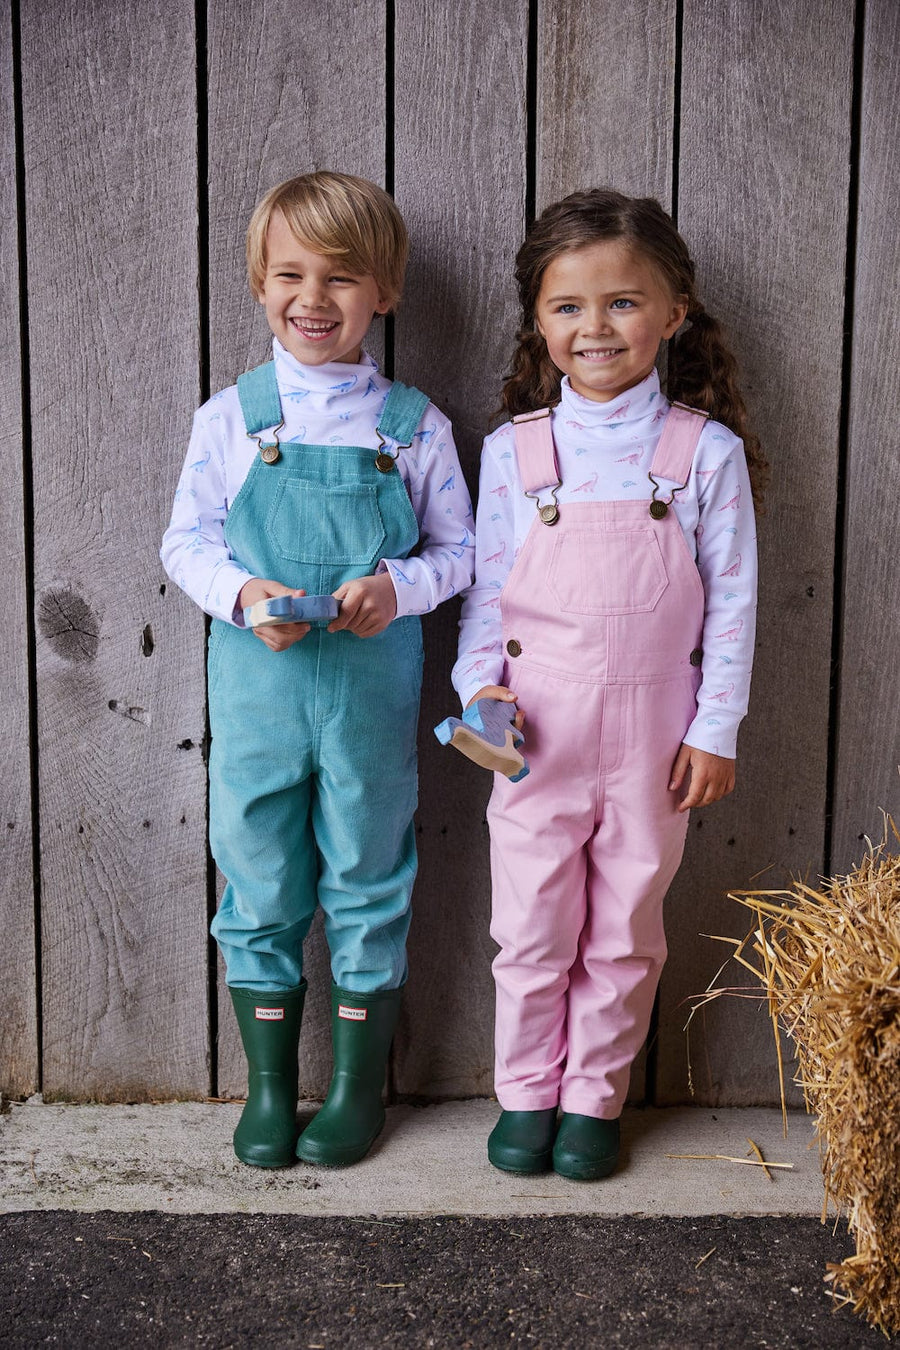 classic childrens clothing overall with brass buttons in a light pink twill